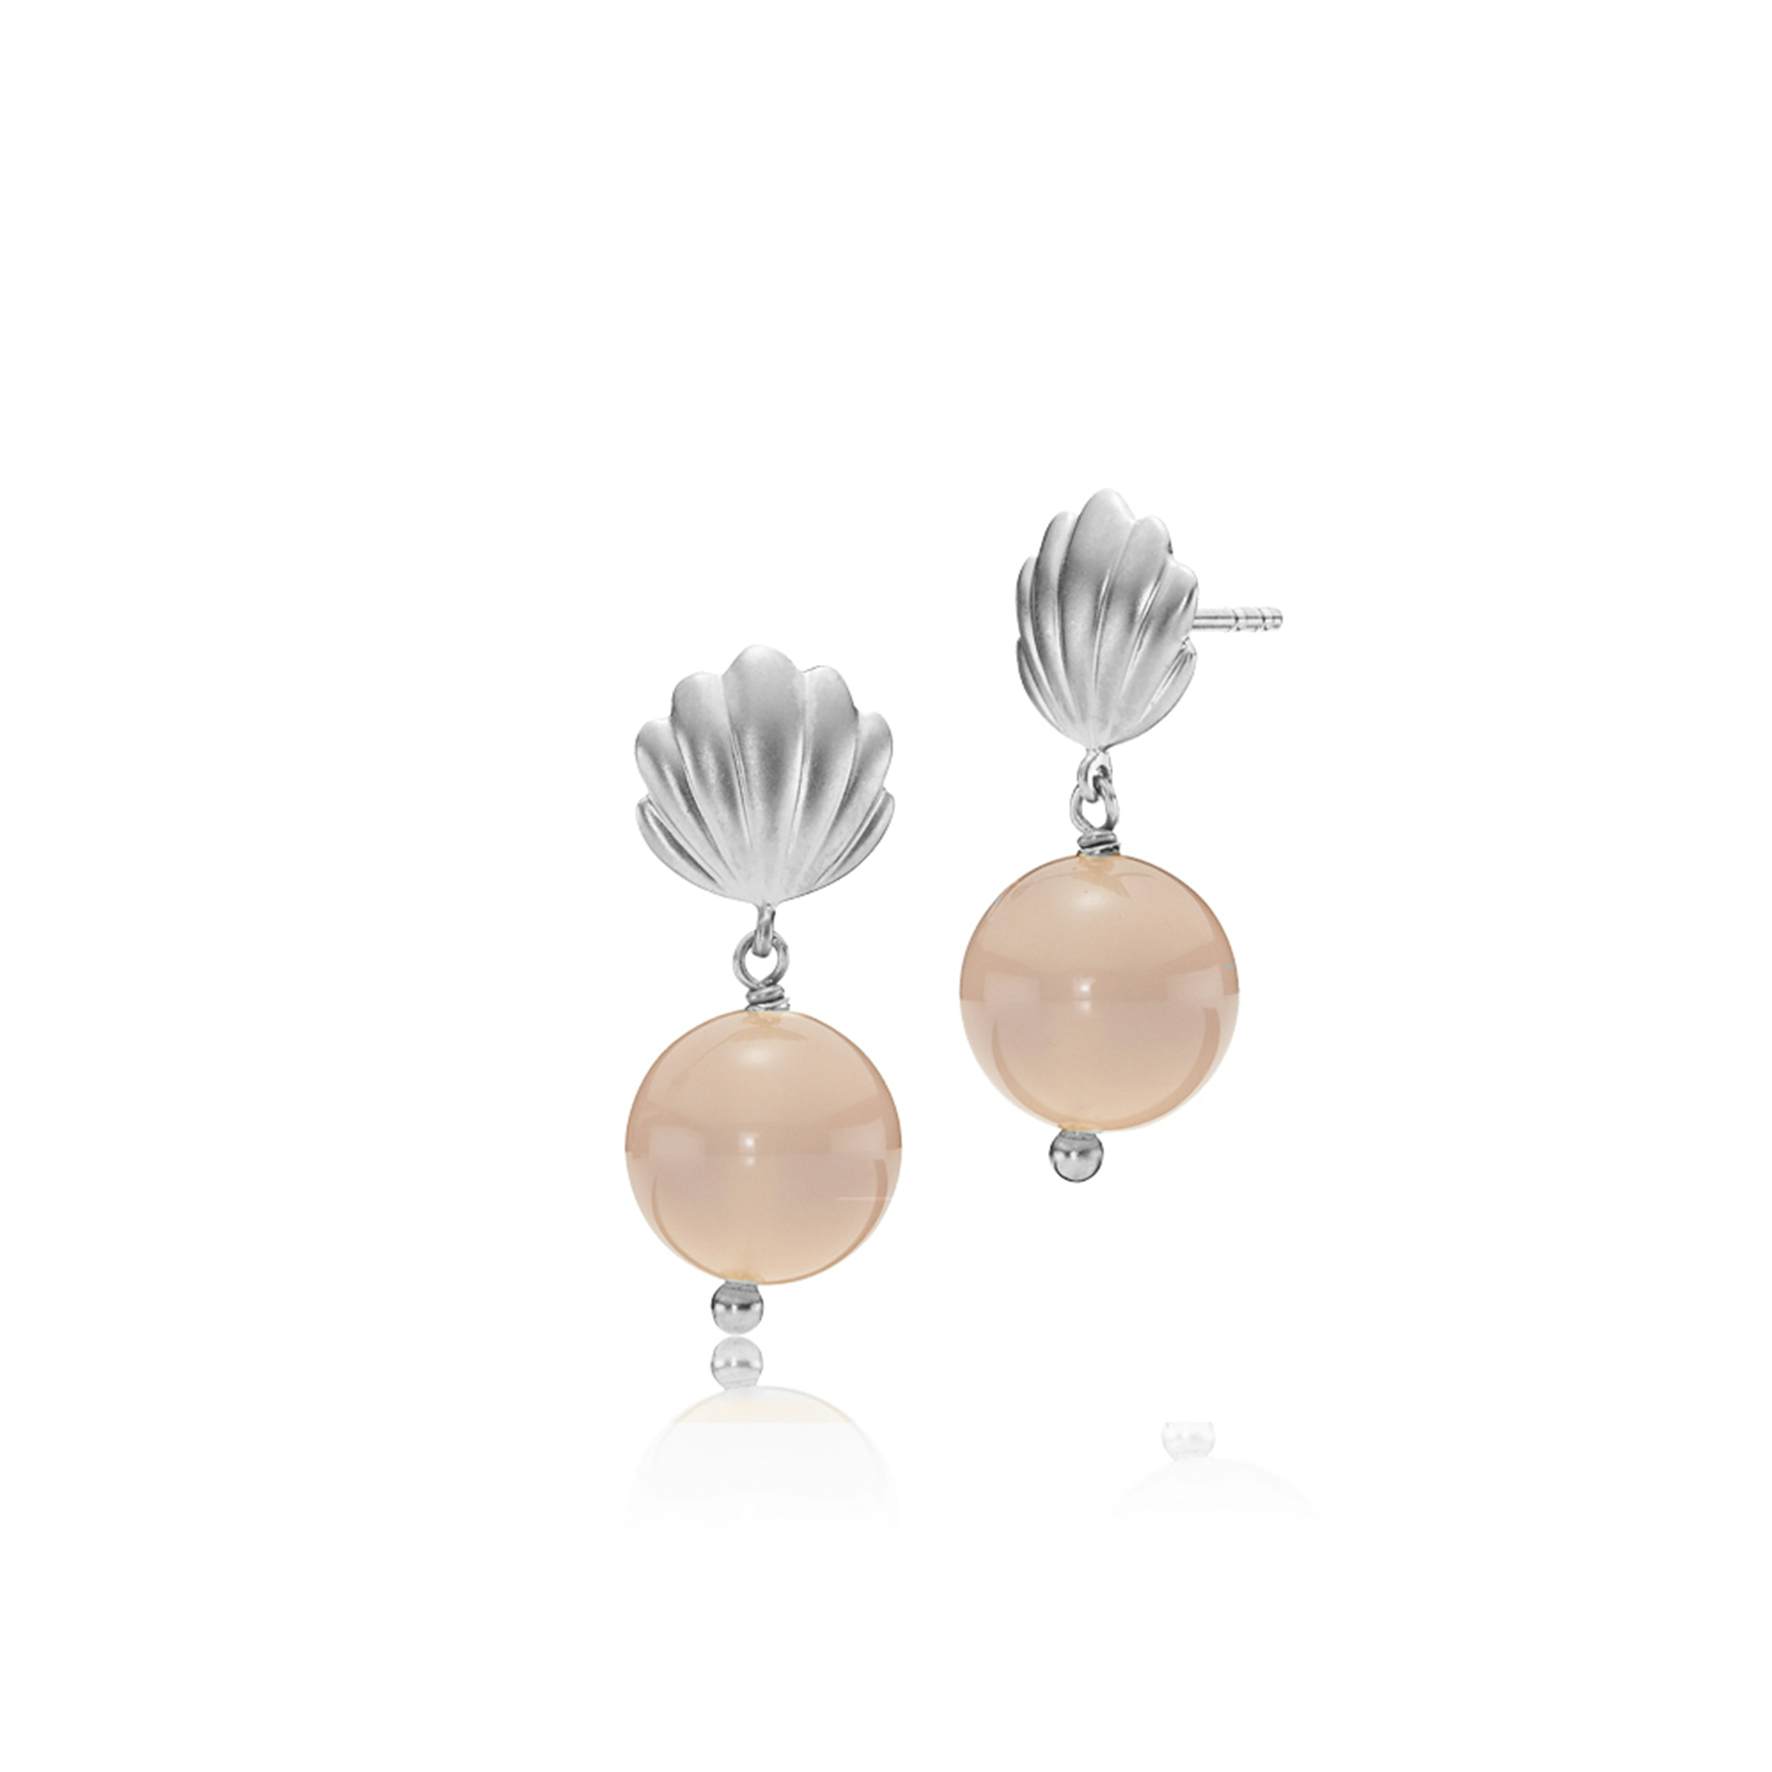 Isabella Pink Earrings from Izabel Camille in Silver Sterling 925